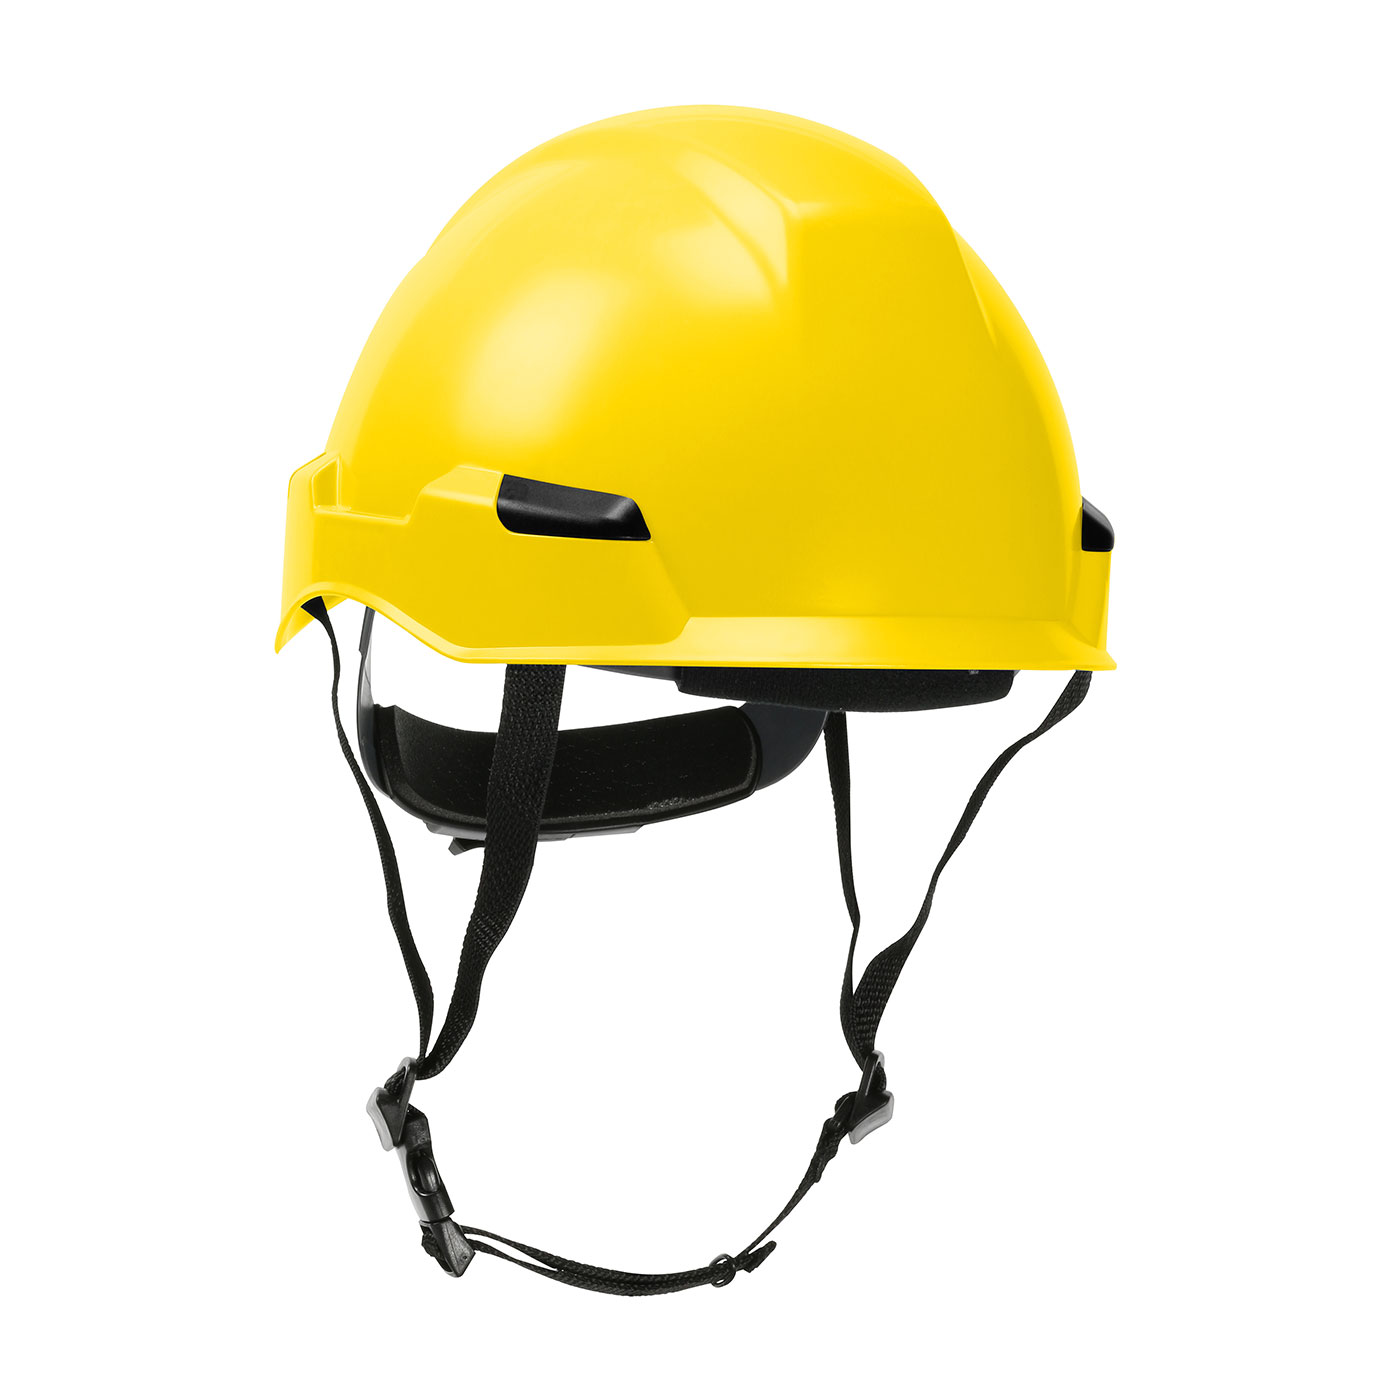 280-HP141R PIP® Dynamic Rocky™ Industrial Climbing Helmet with Polycarbonate / ABS Shell,  Nylon Suspension, Wheel Ratchet Adjustment and 4-Point Chin Strap- Yellow